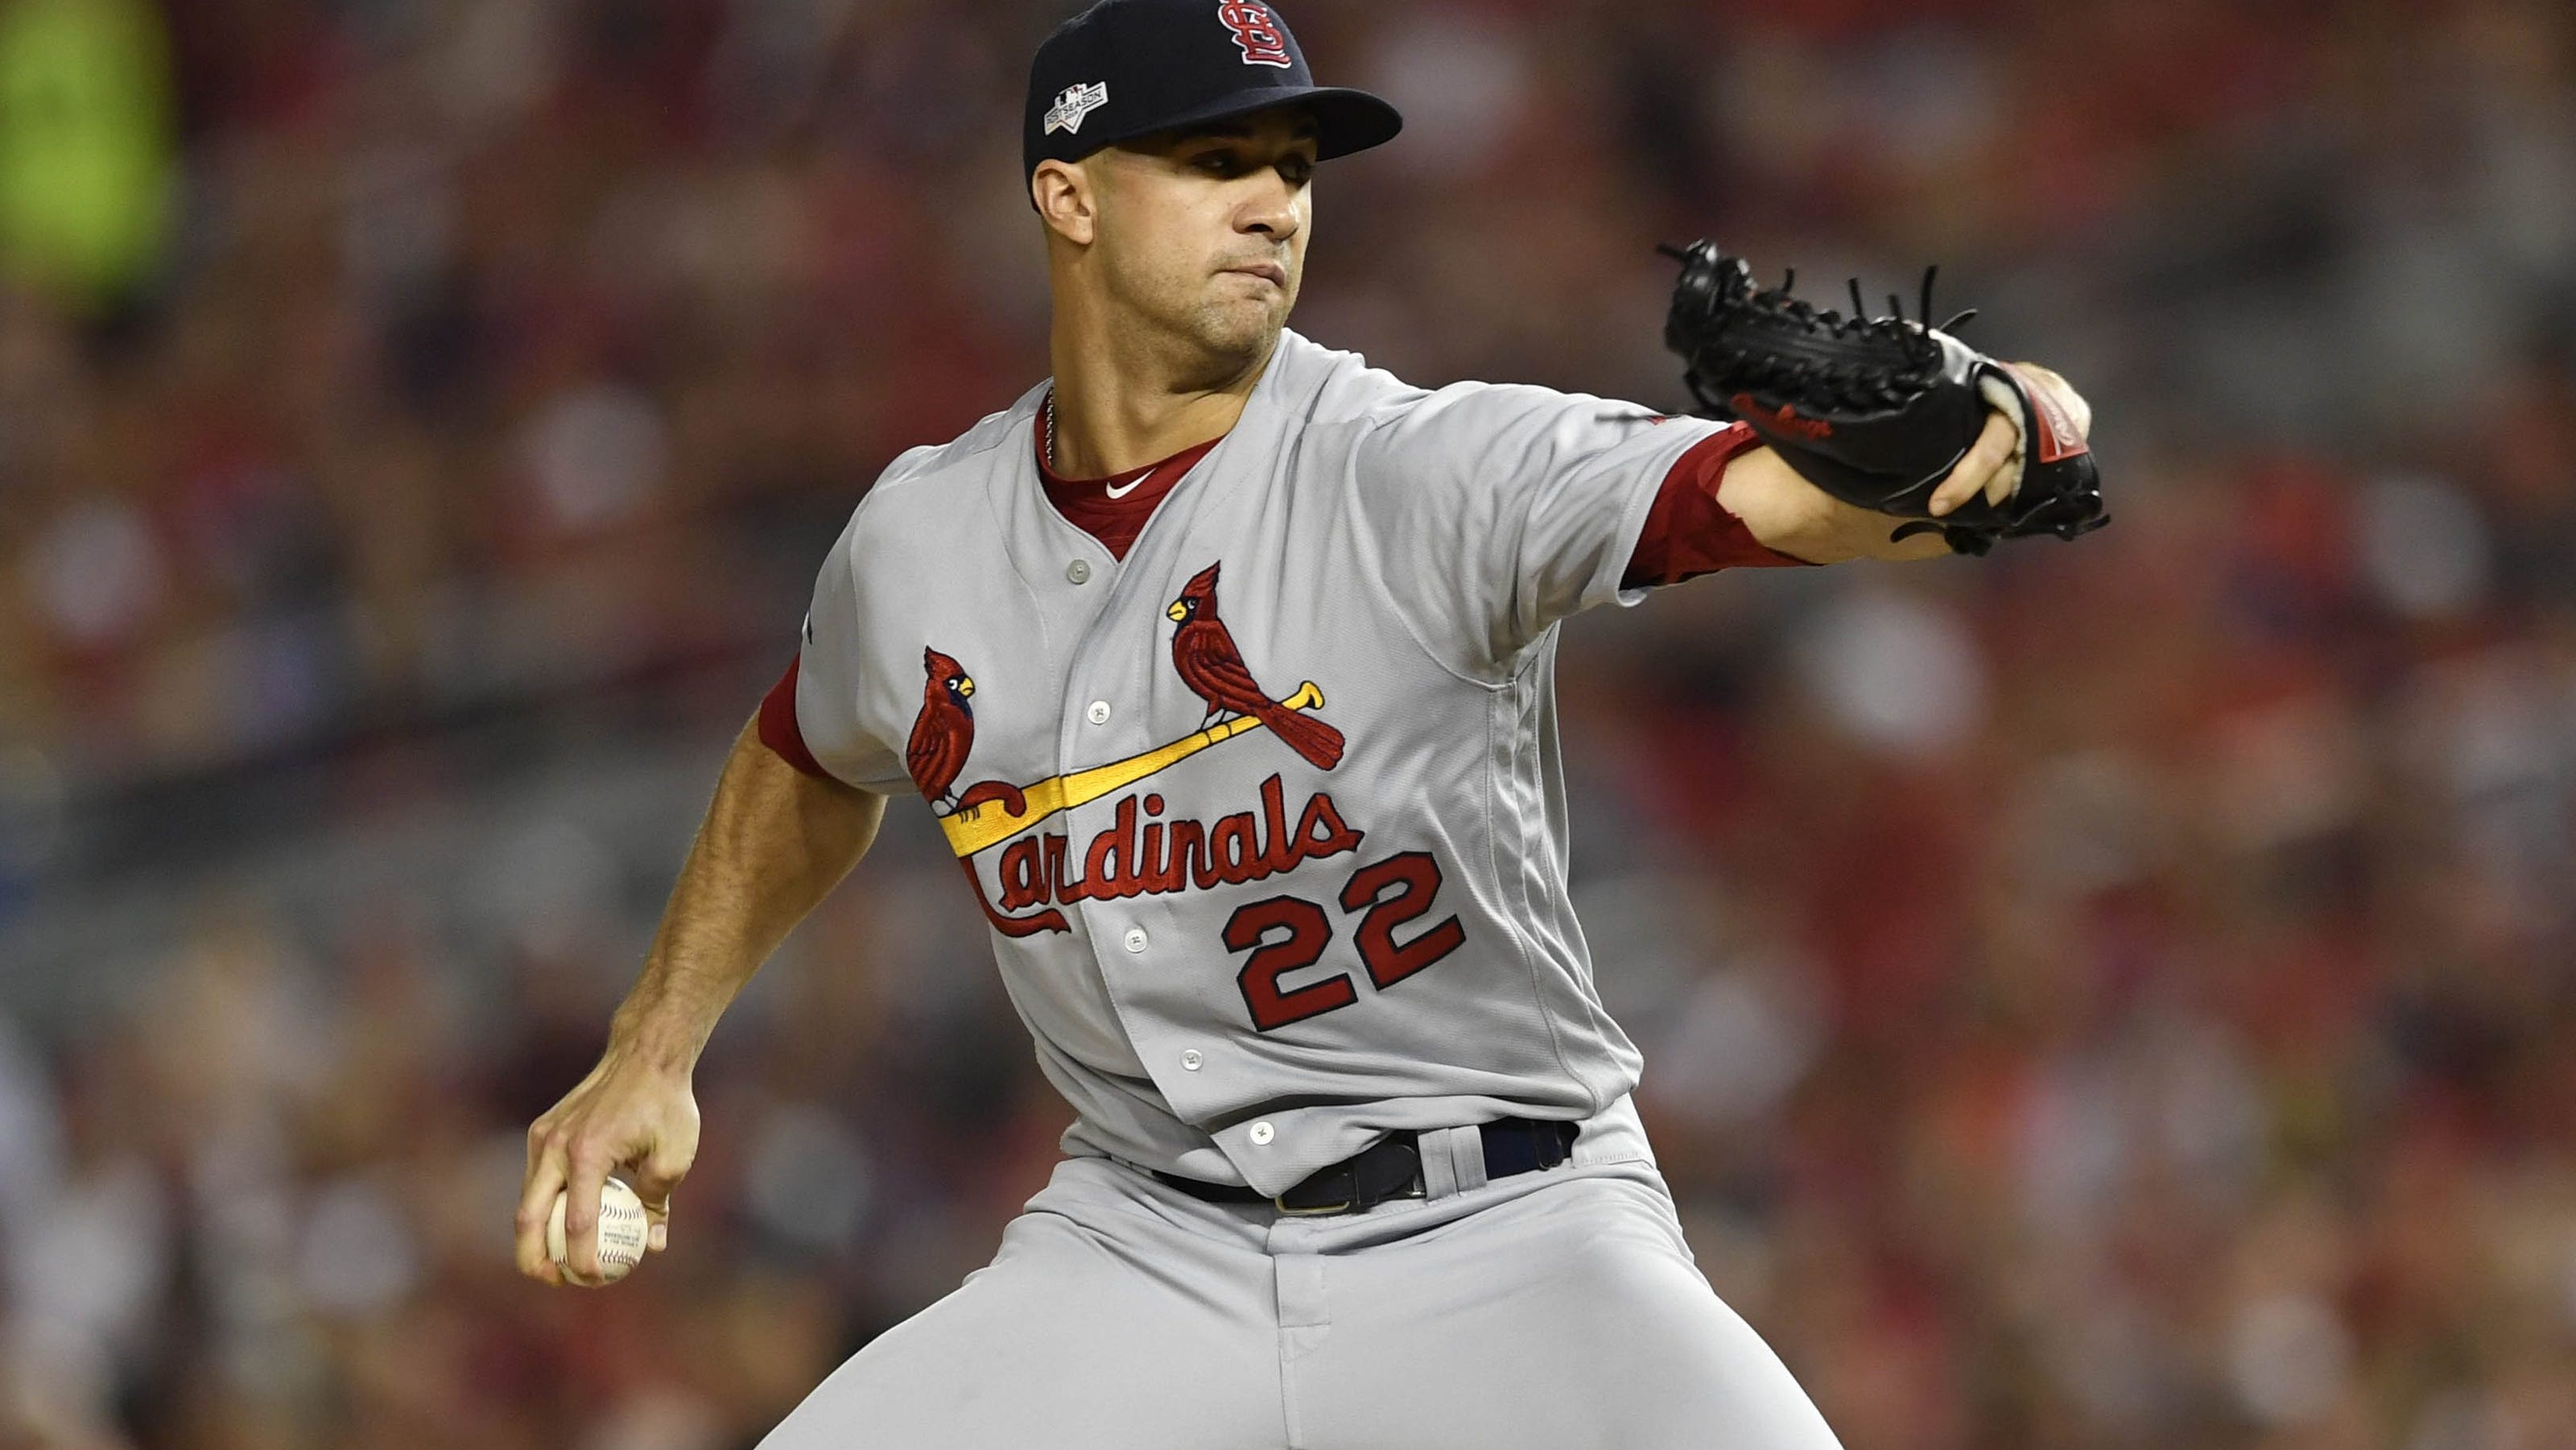 St. Louis Cardinals at San Diego Padres Game 3 odds, picks and best bets